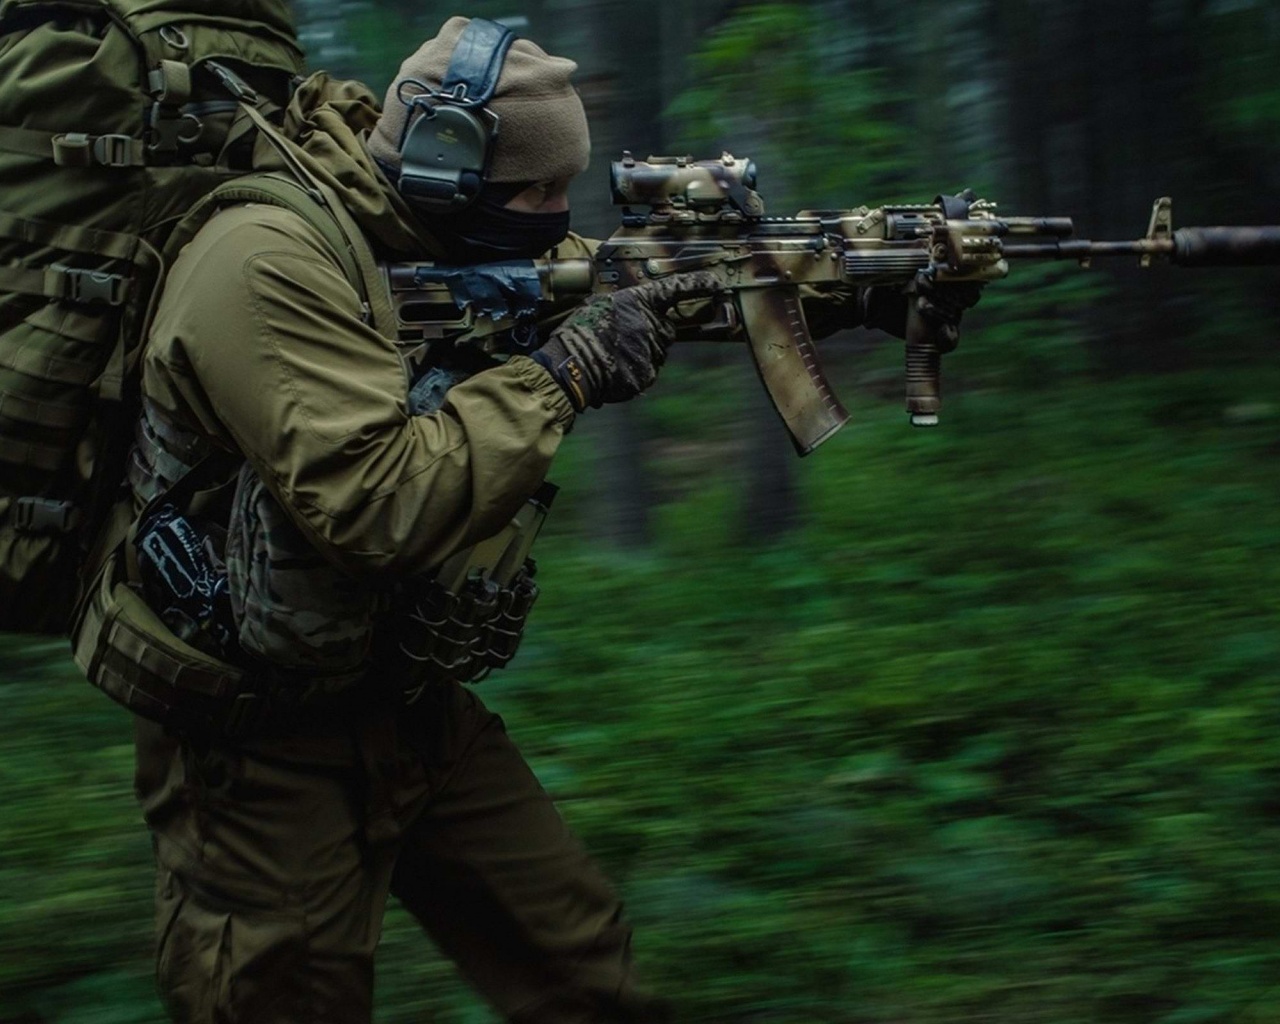 Forest In The Special Forces